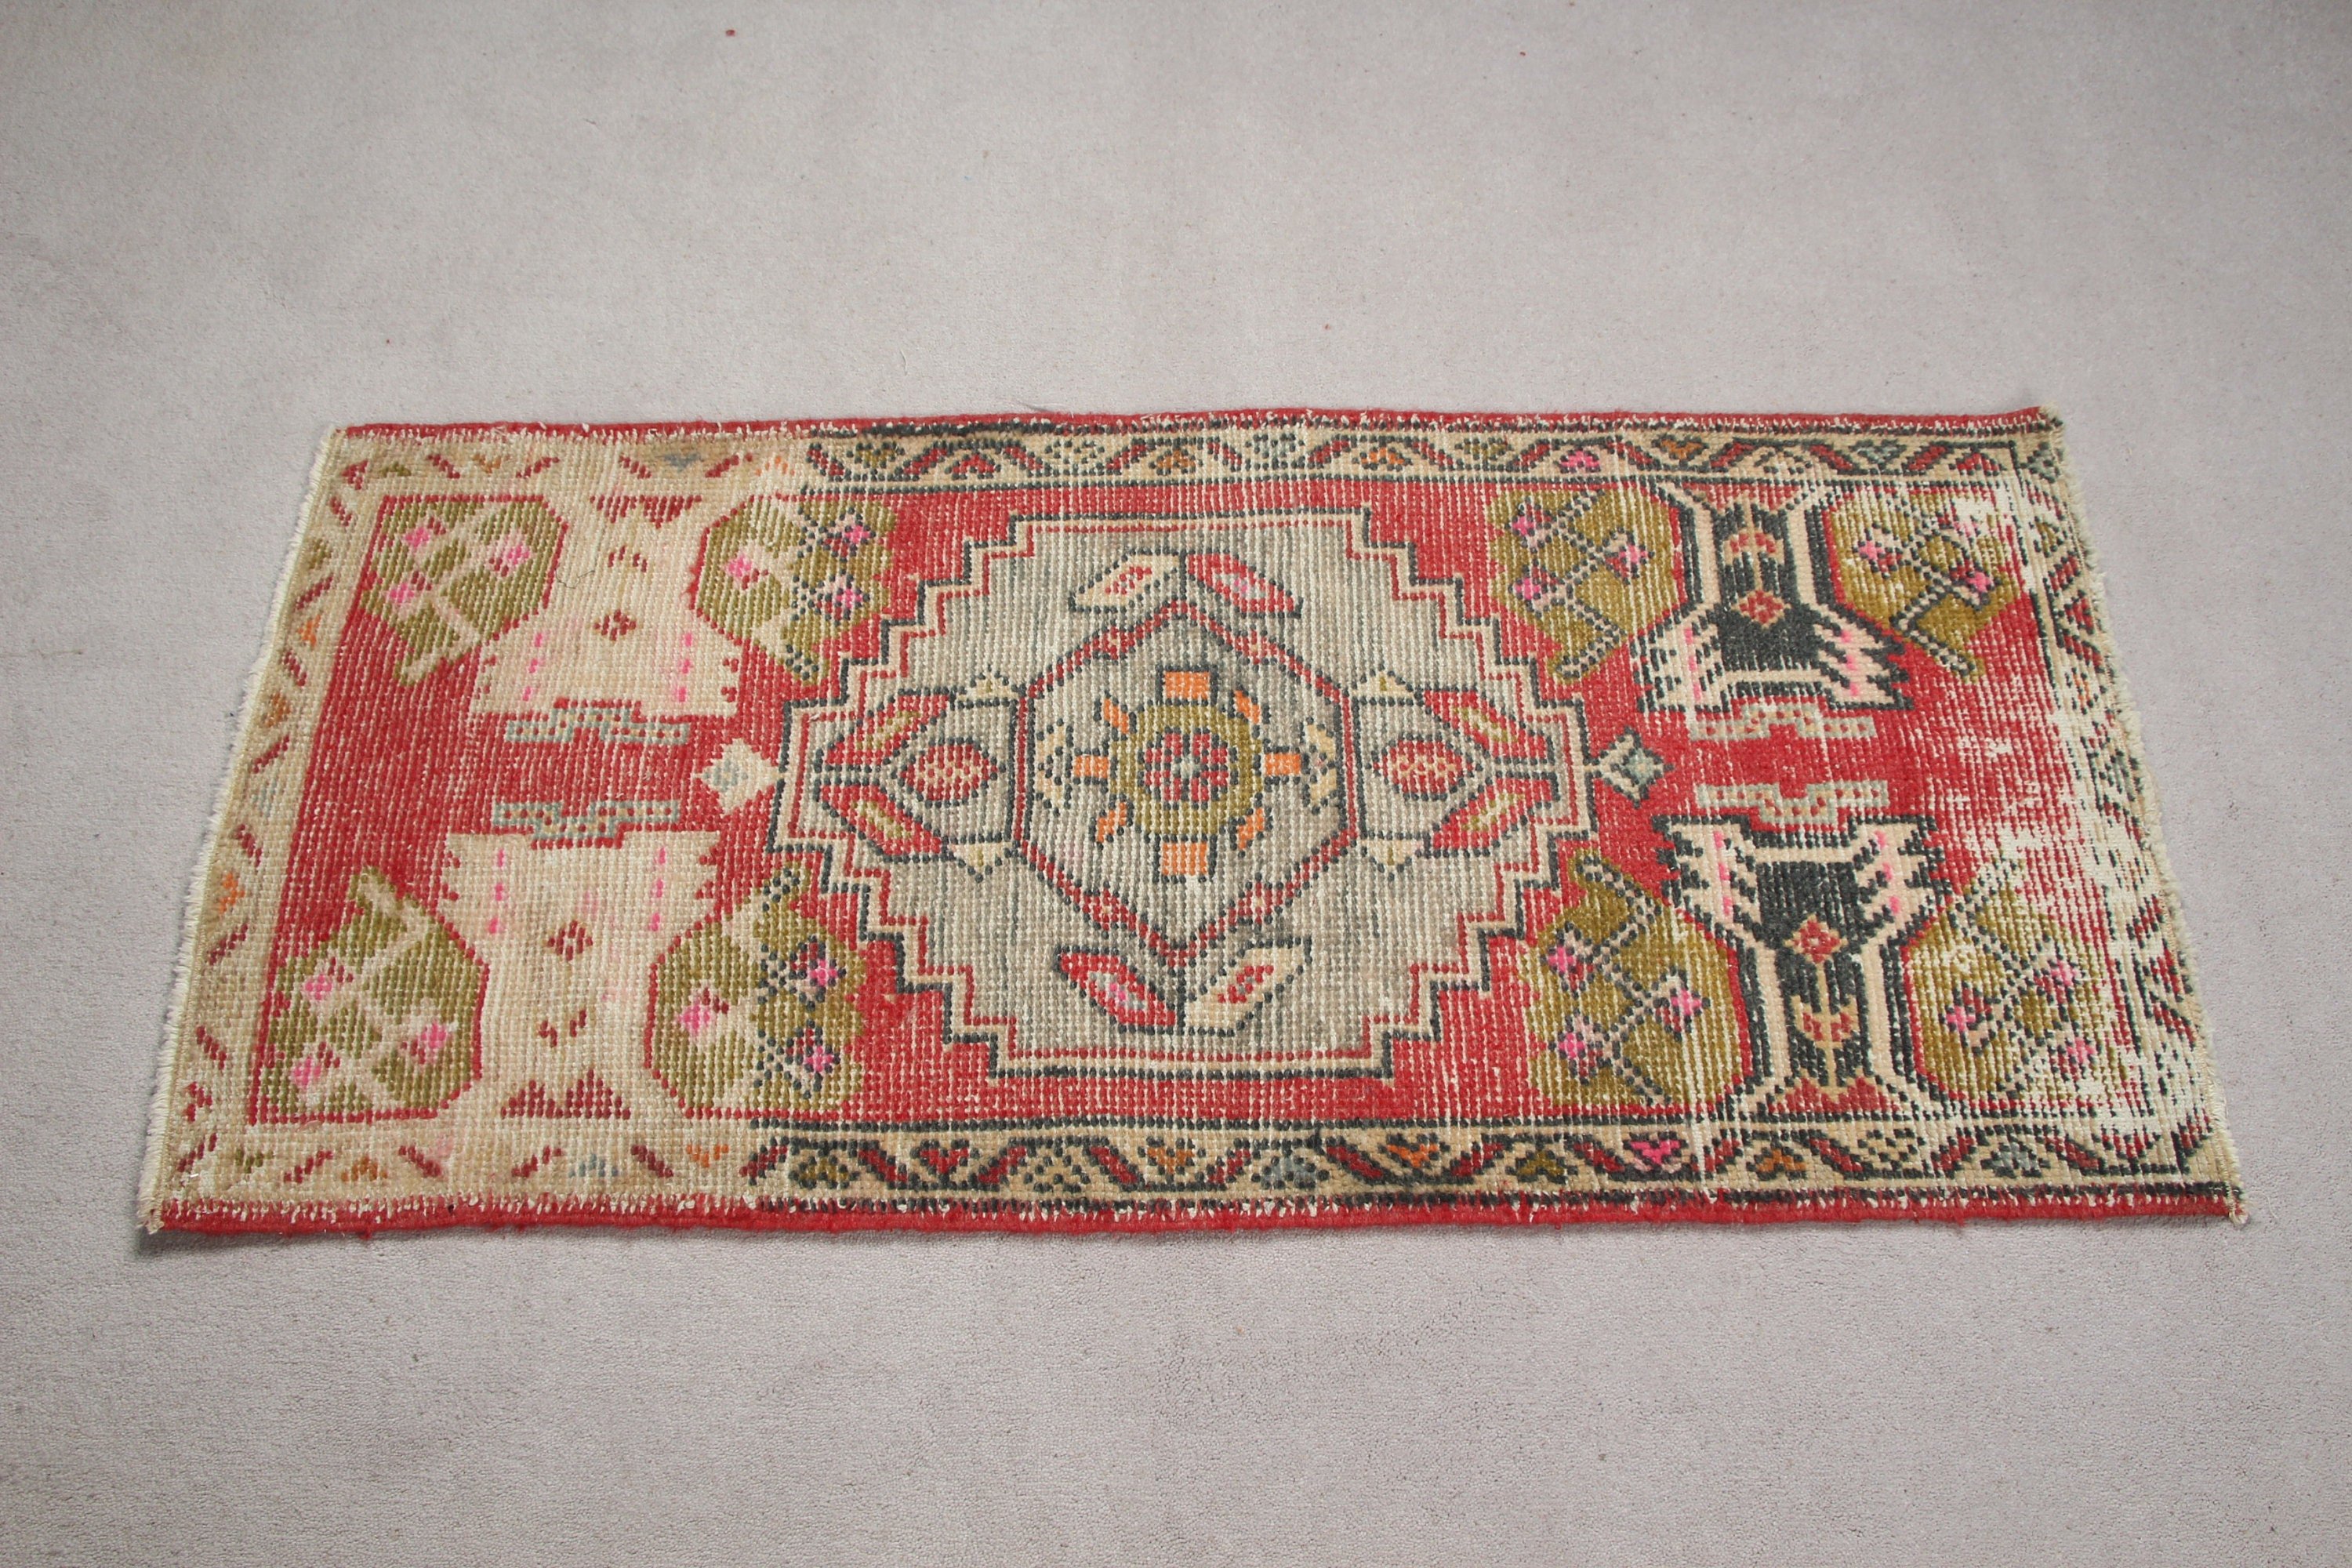 Moroccan Rugs, Entry Rug, Rugs for Nursery, Anatolian Rug, Vintage Rugs, 1.8x3.7 ft Small Rug, Door Mat Rug, Turkish Rugs, Red Cool Rugs